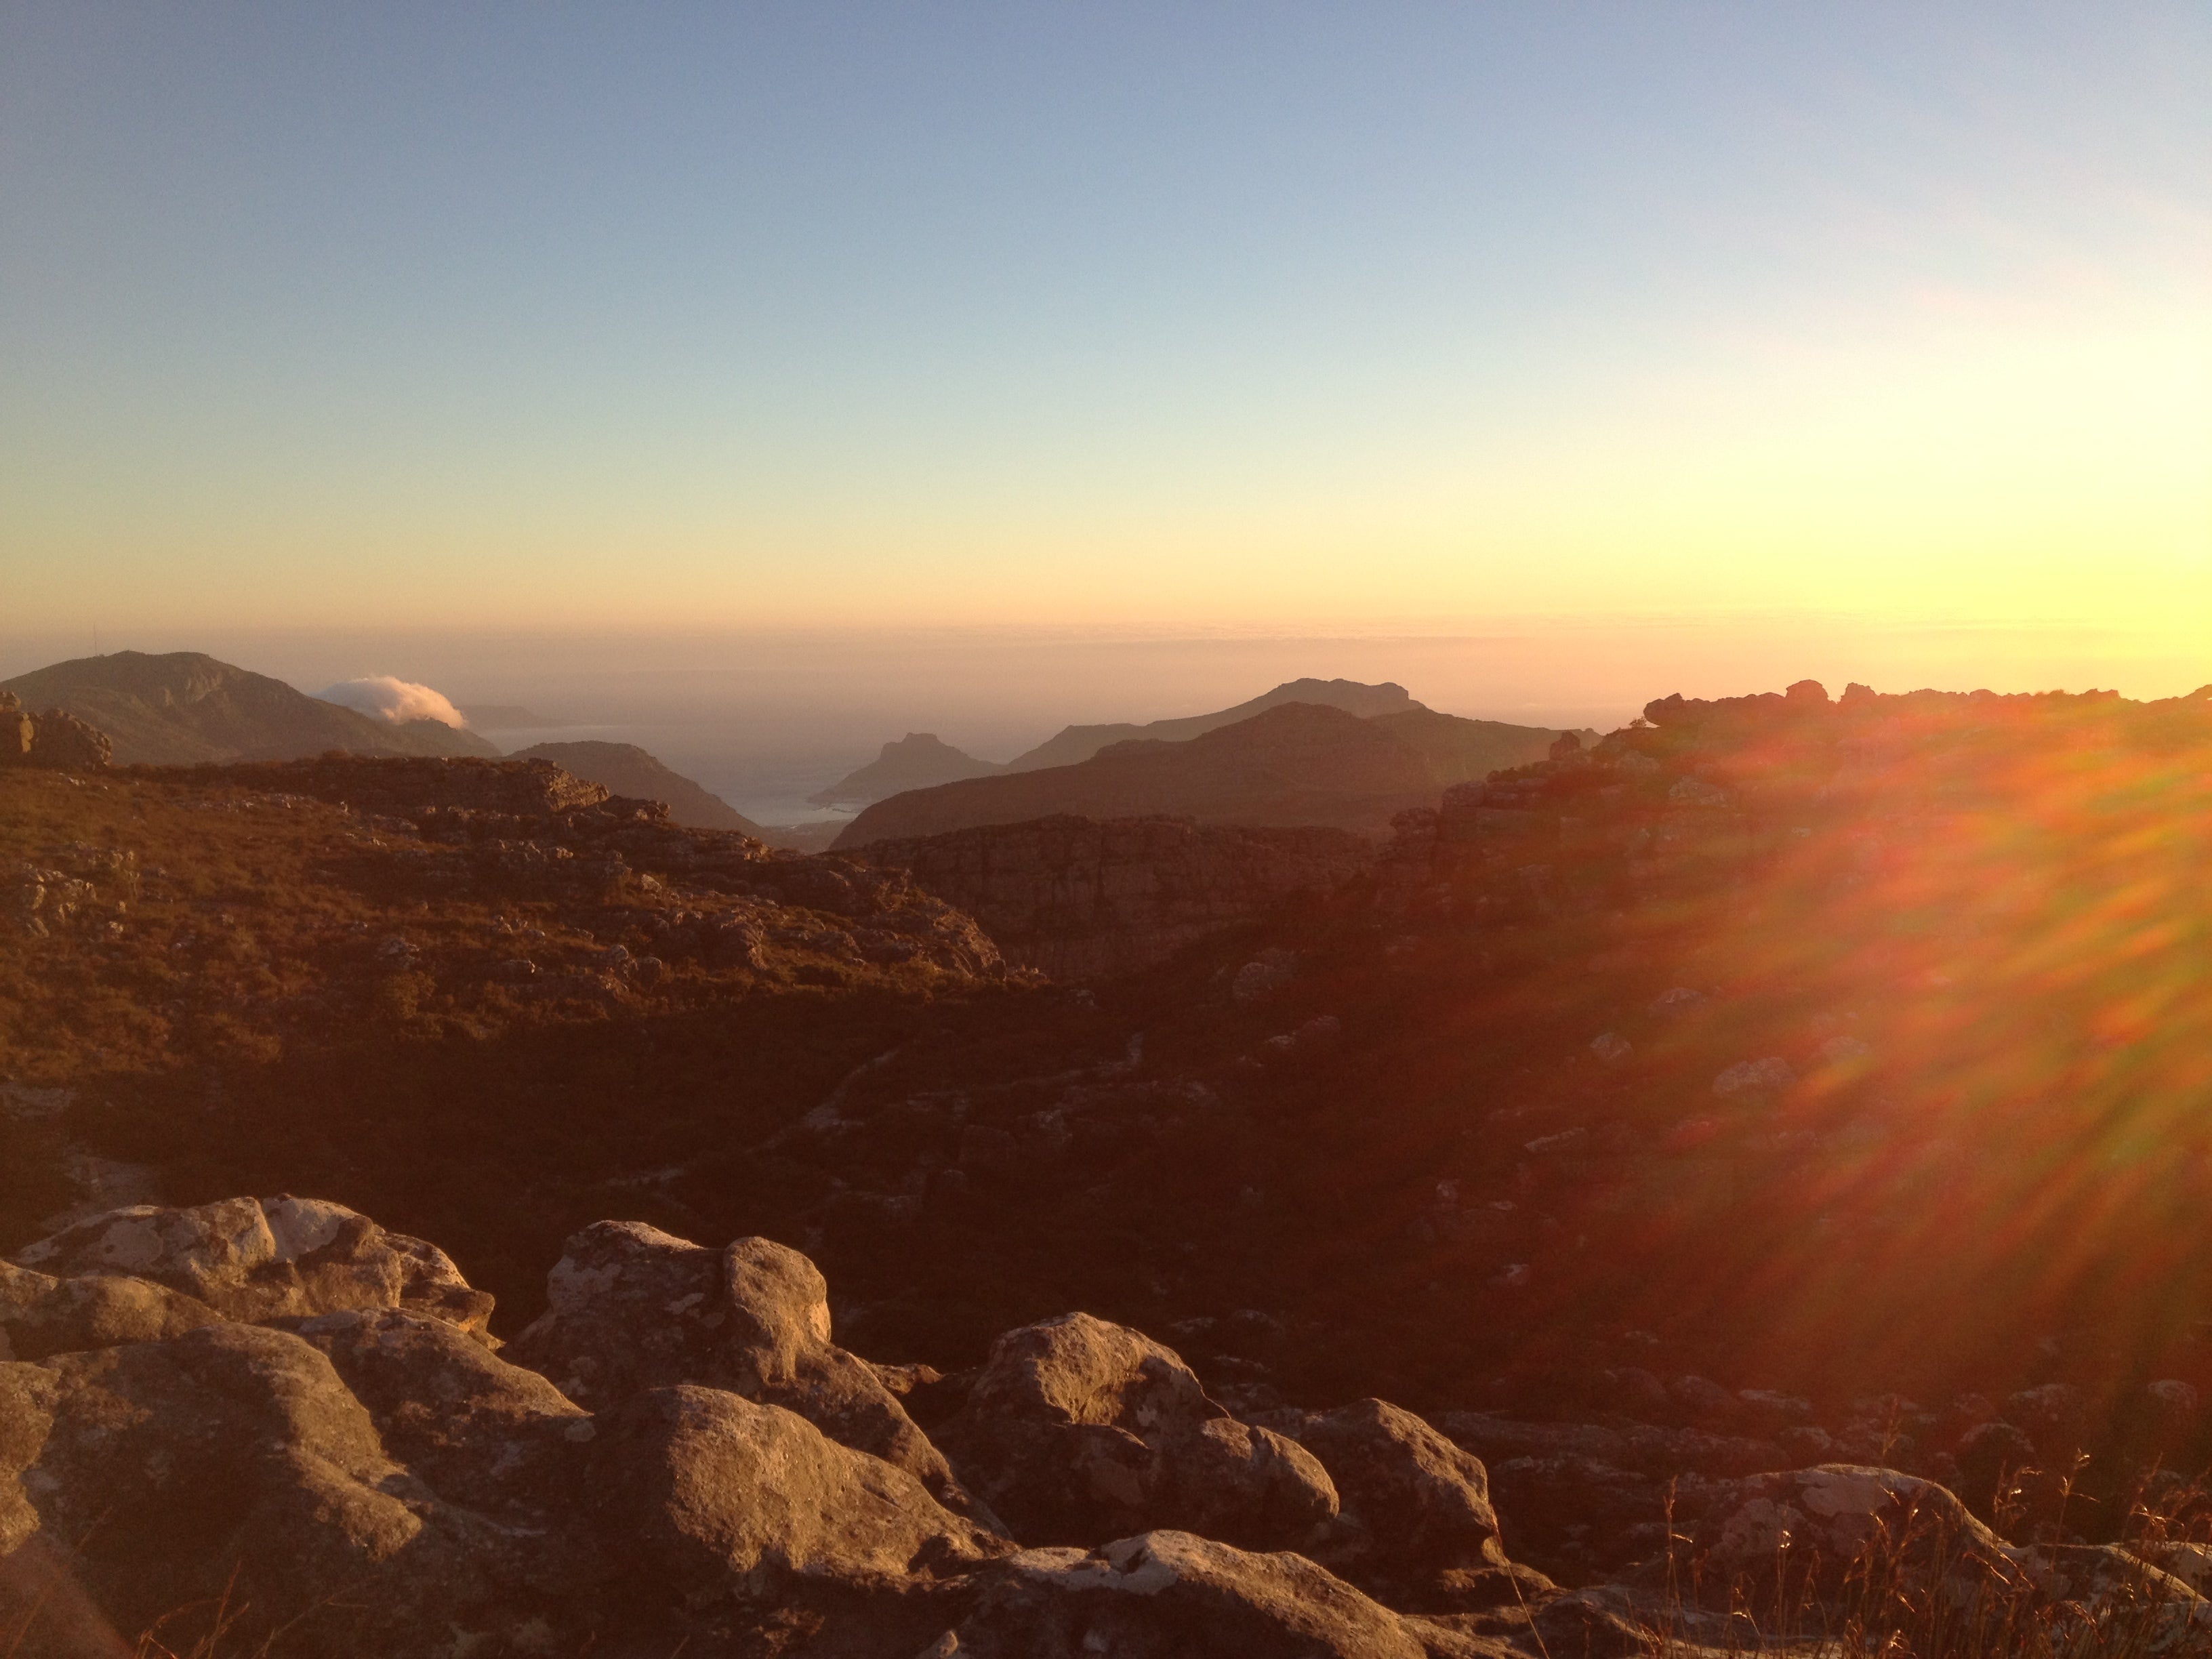 Table Mountain, Cape Town, South Africa. Photo by Fiona Cameron